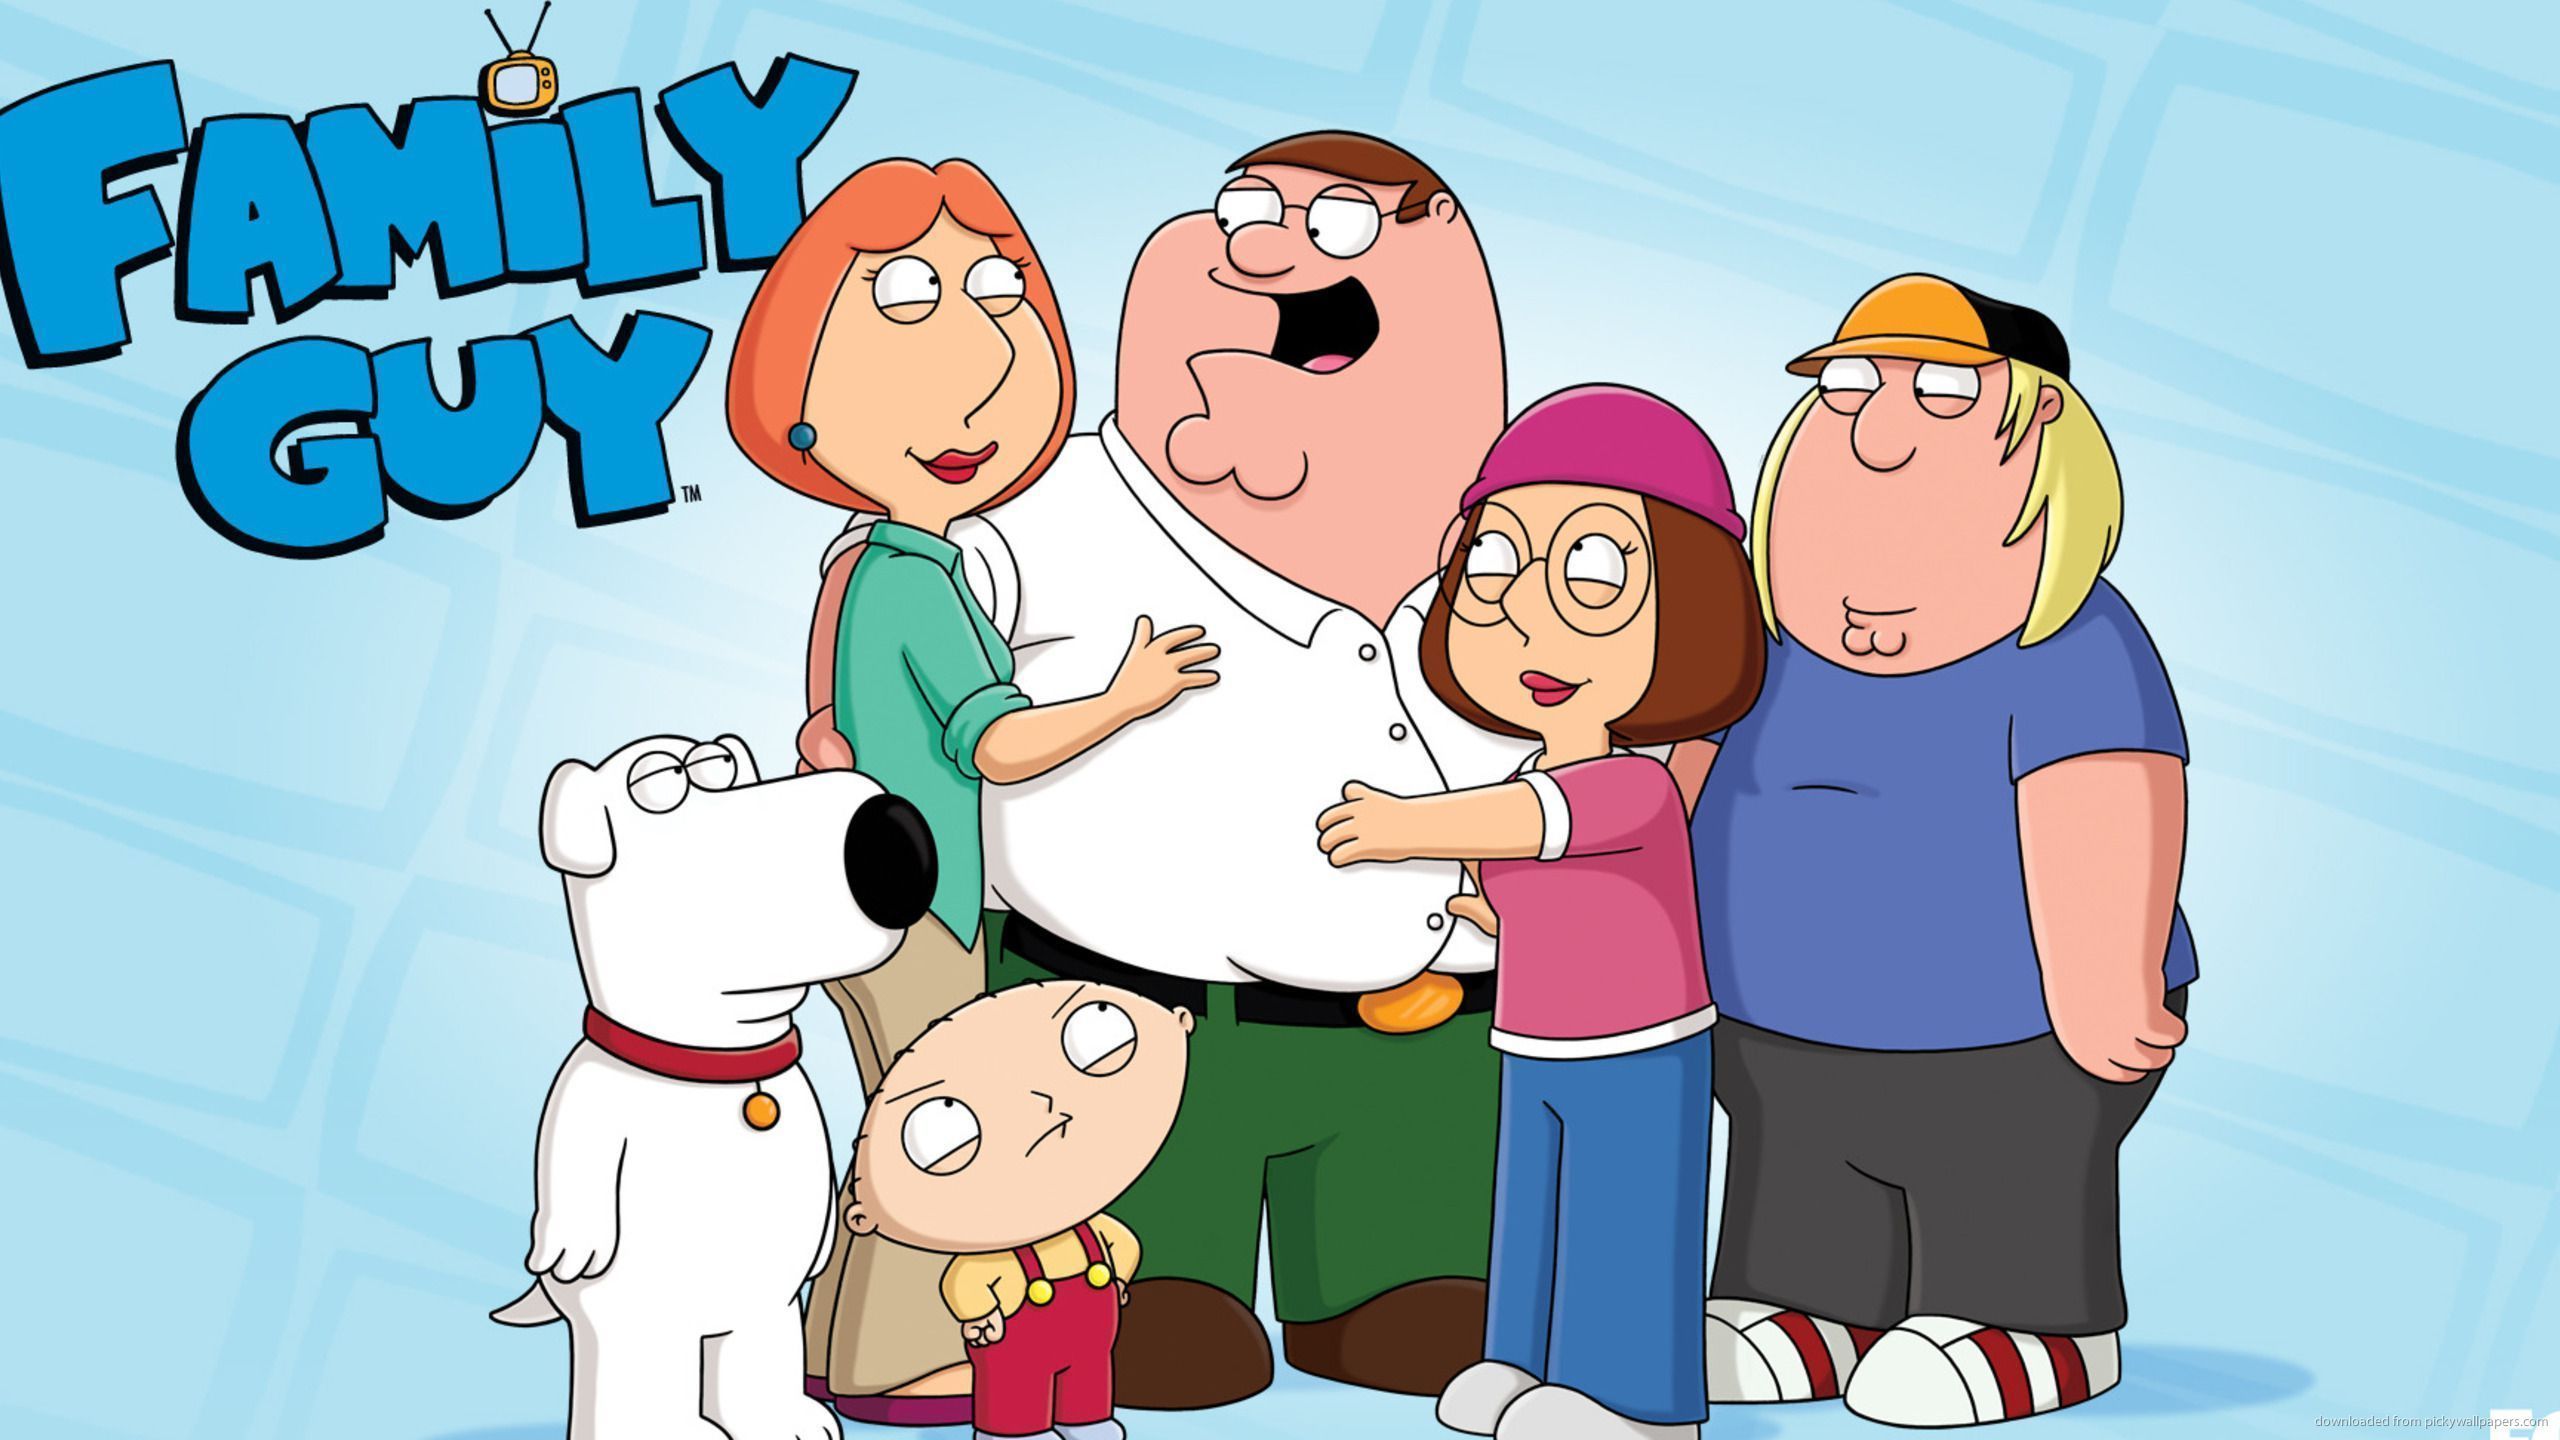 Family Guy Wallpapers High Resolution and Quality Download